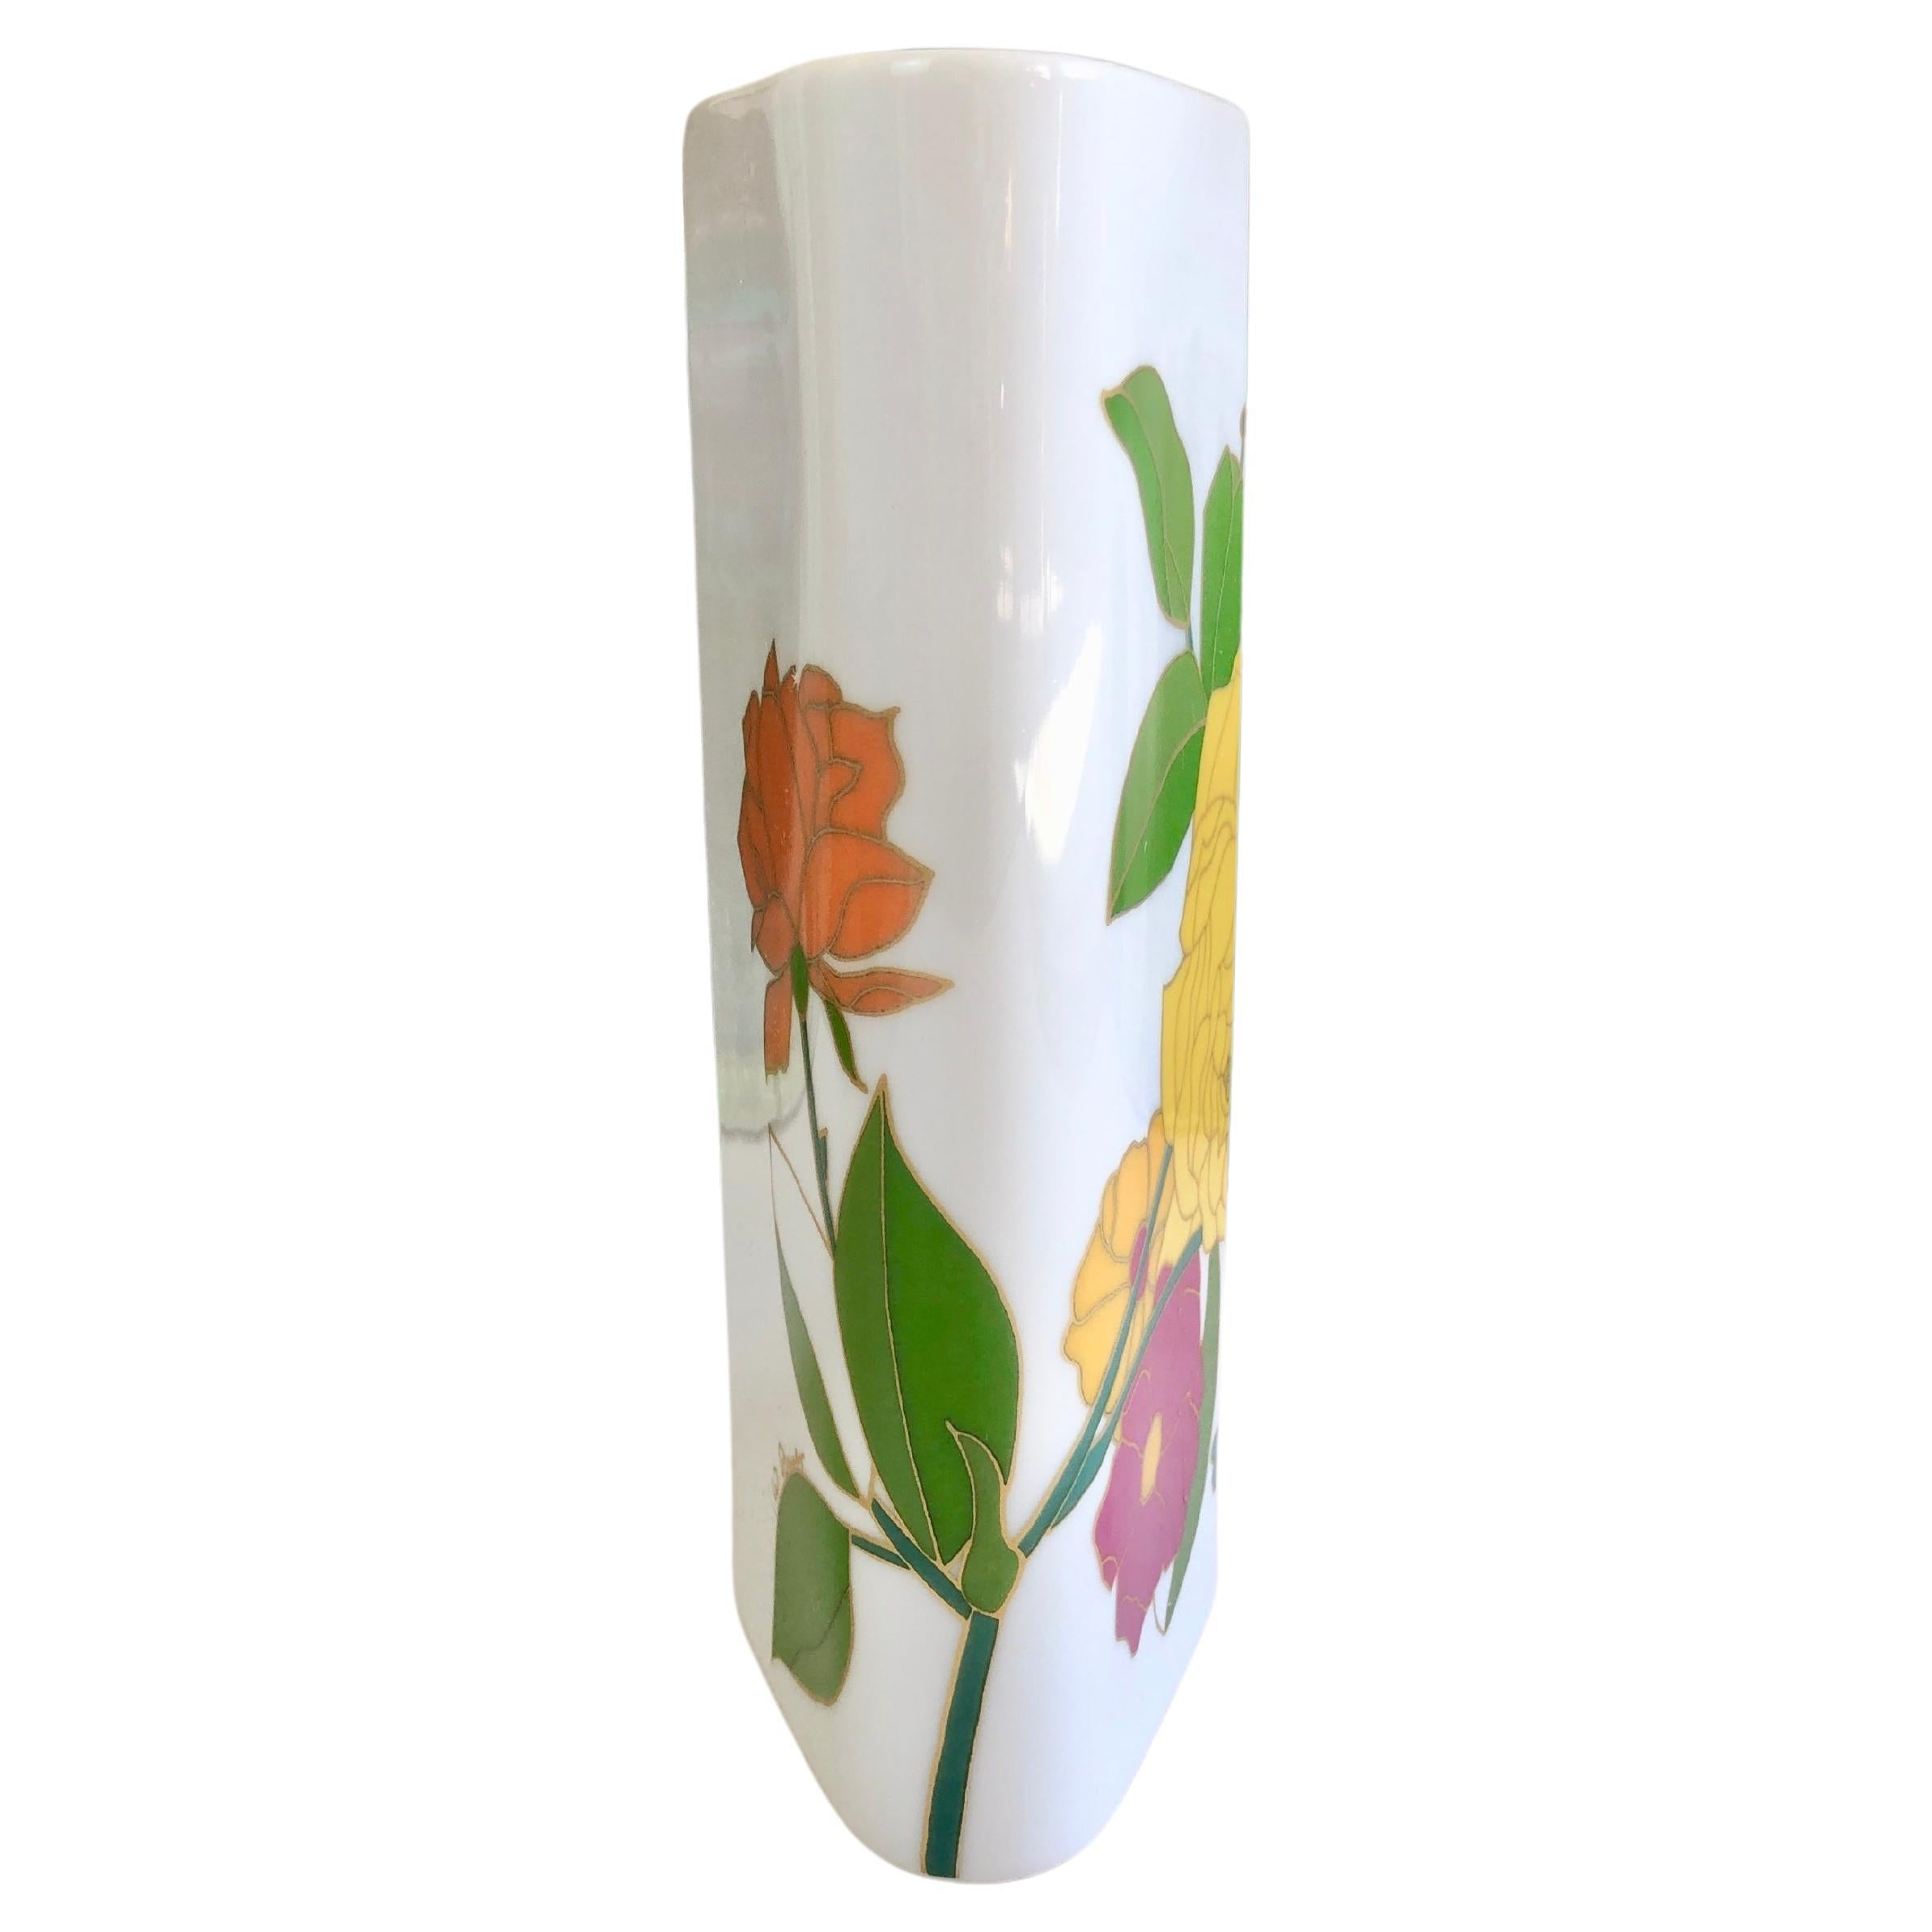 20th Century Abstract Floral Vase Rosenthal Studio-Line, by Wolfgang Bauer 1970s, Germany For Sale